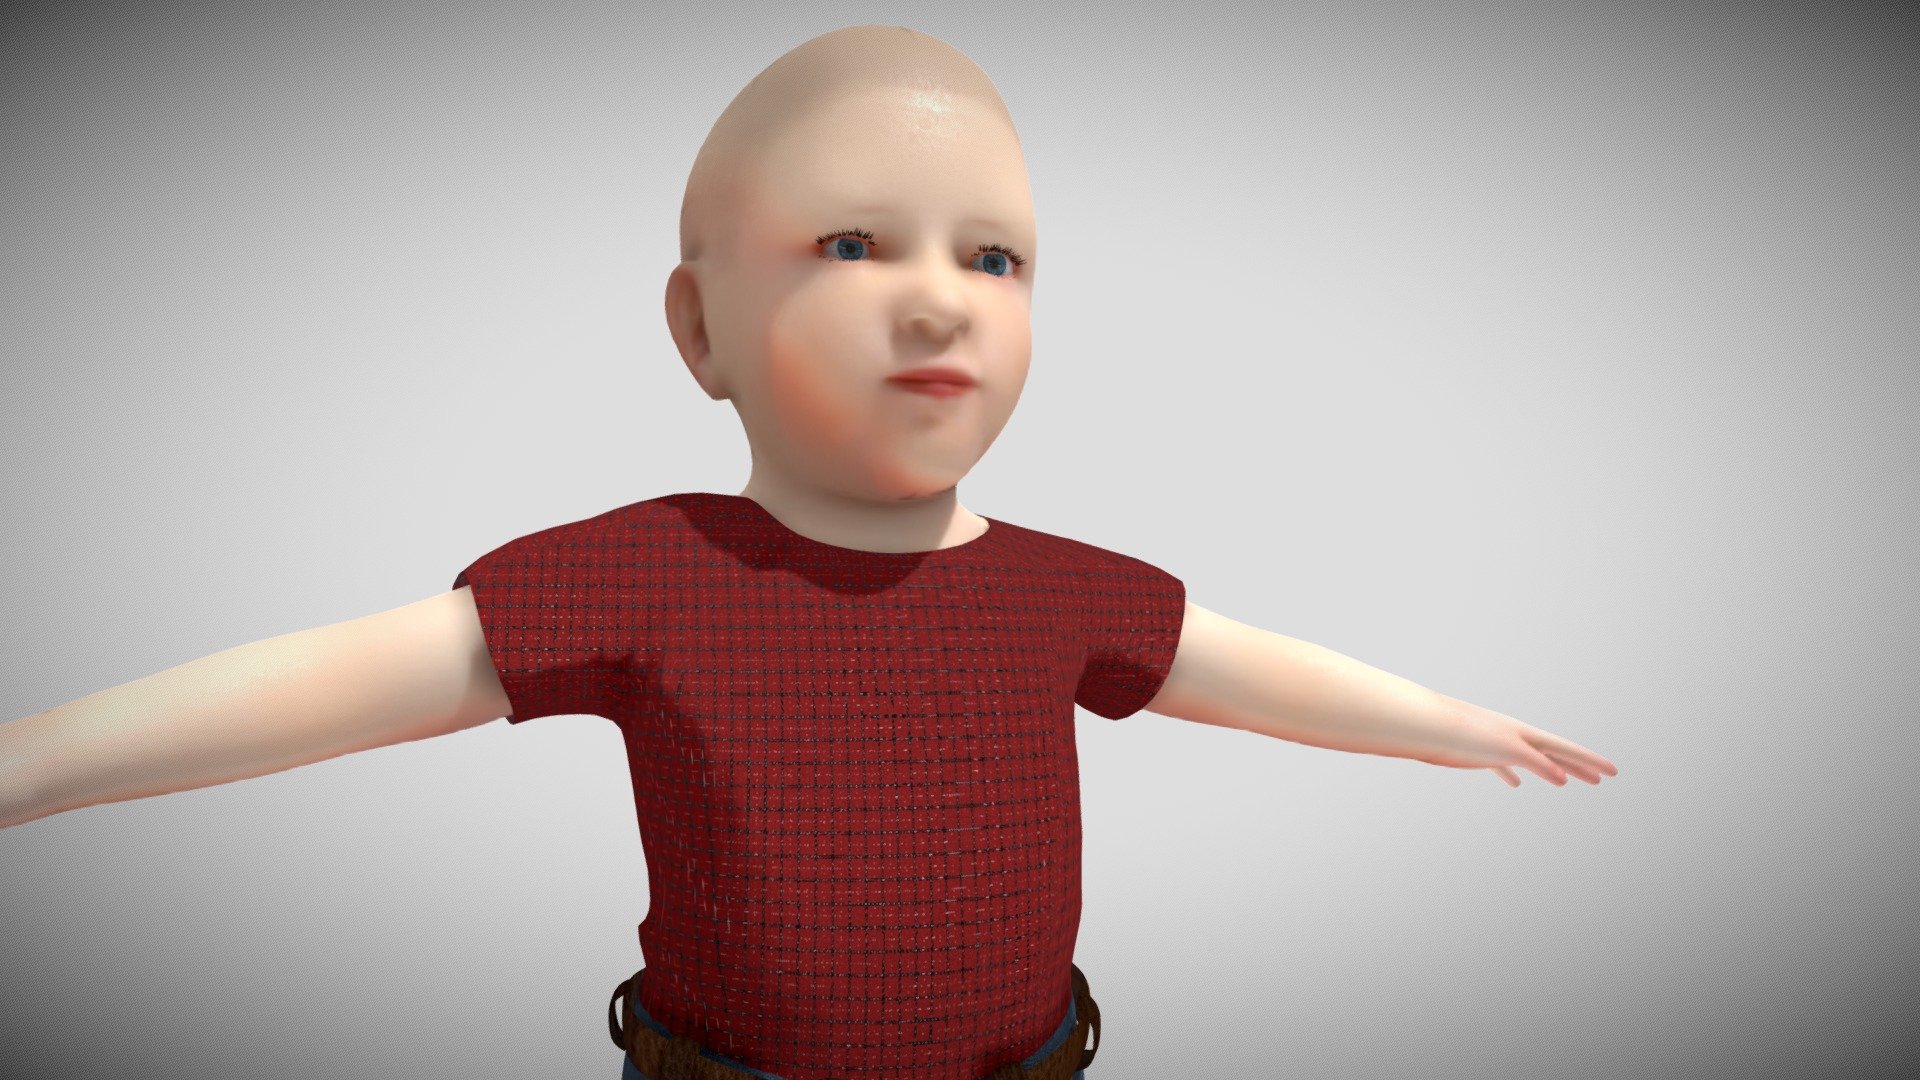 Child Rigged.
Ready for Games.

Textures in 4K.
PBR Materials 3d model